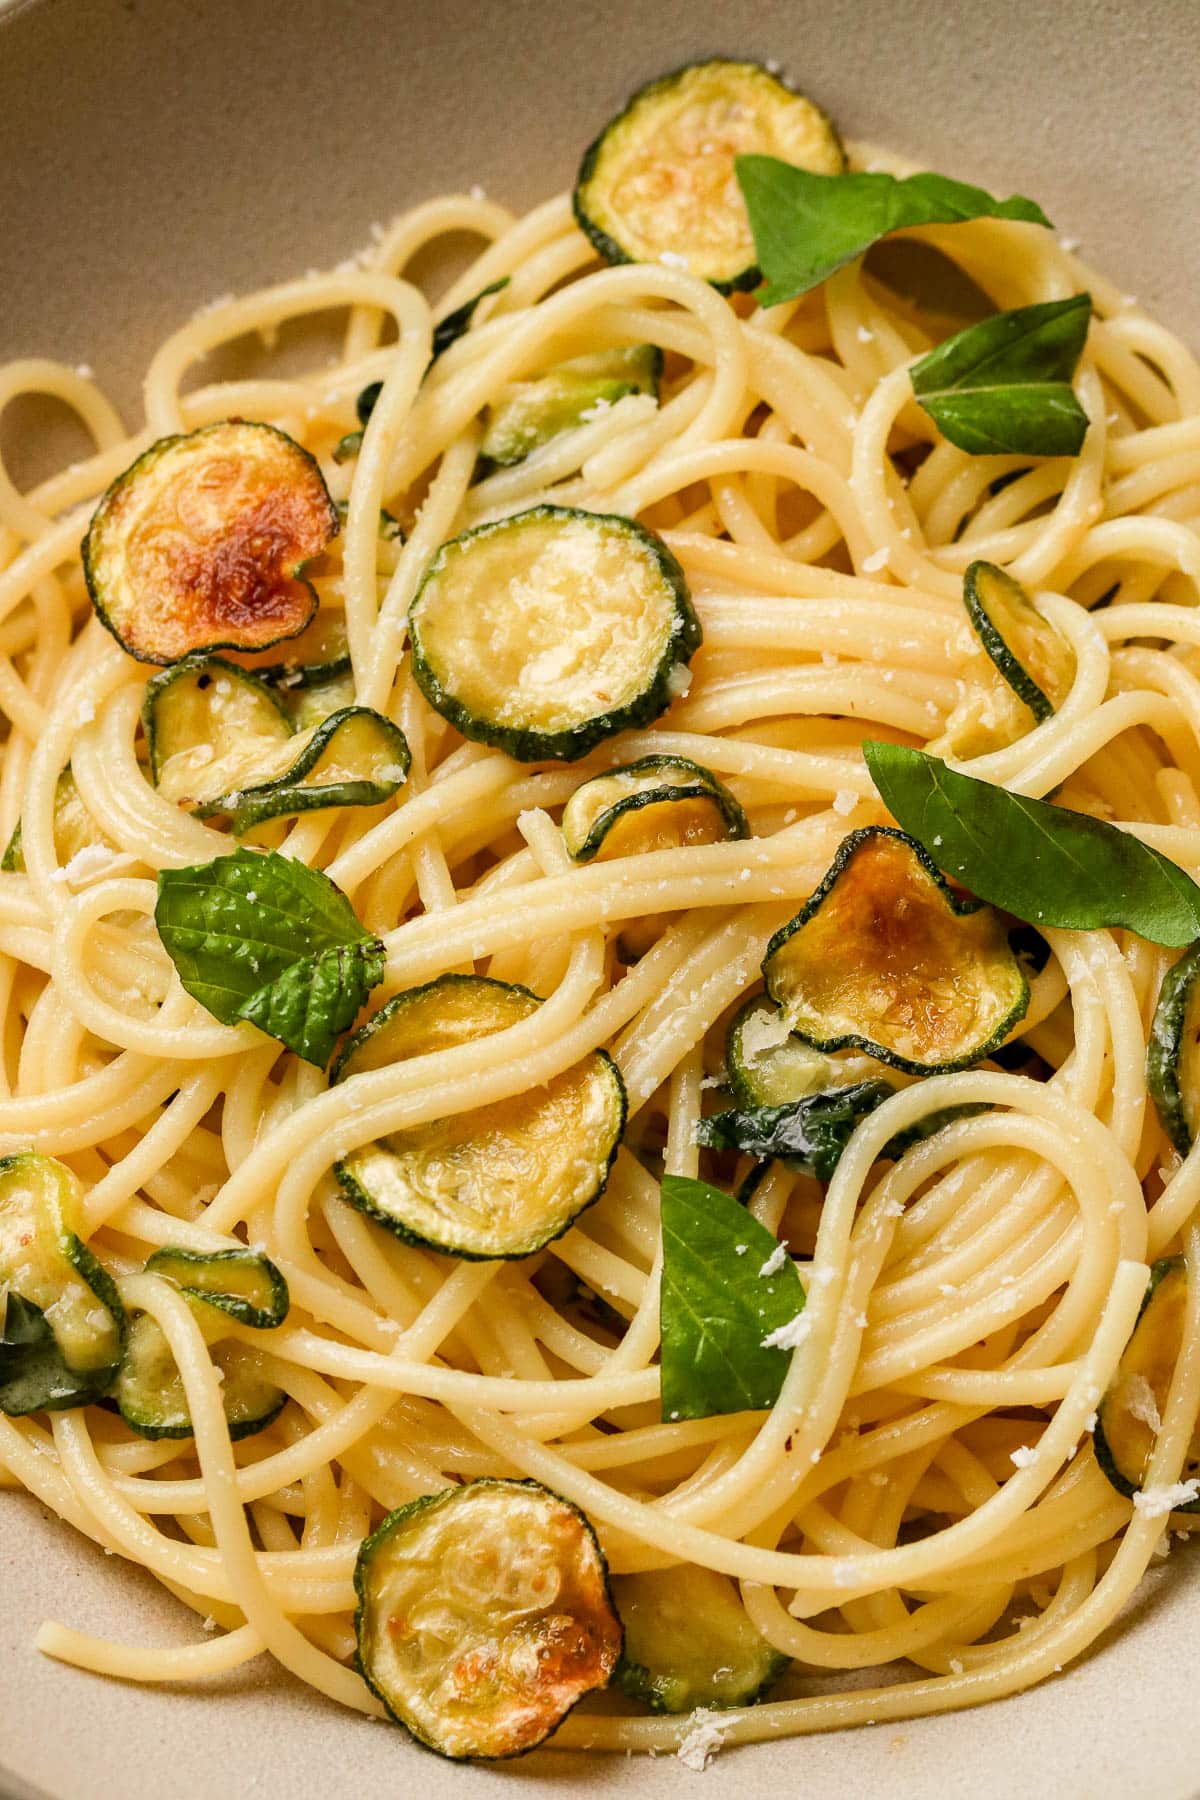 zucchini with pasta in a bowl.